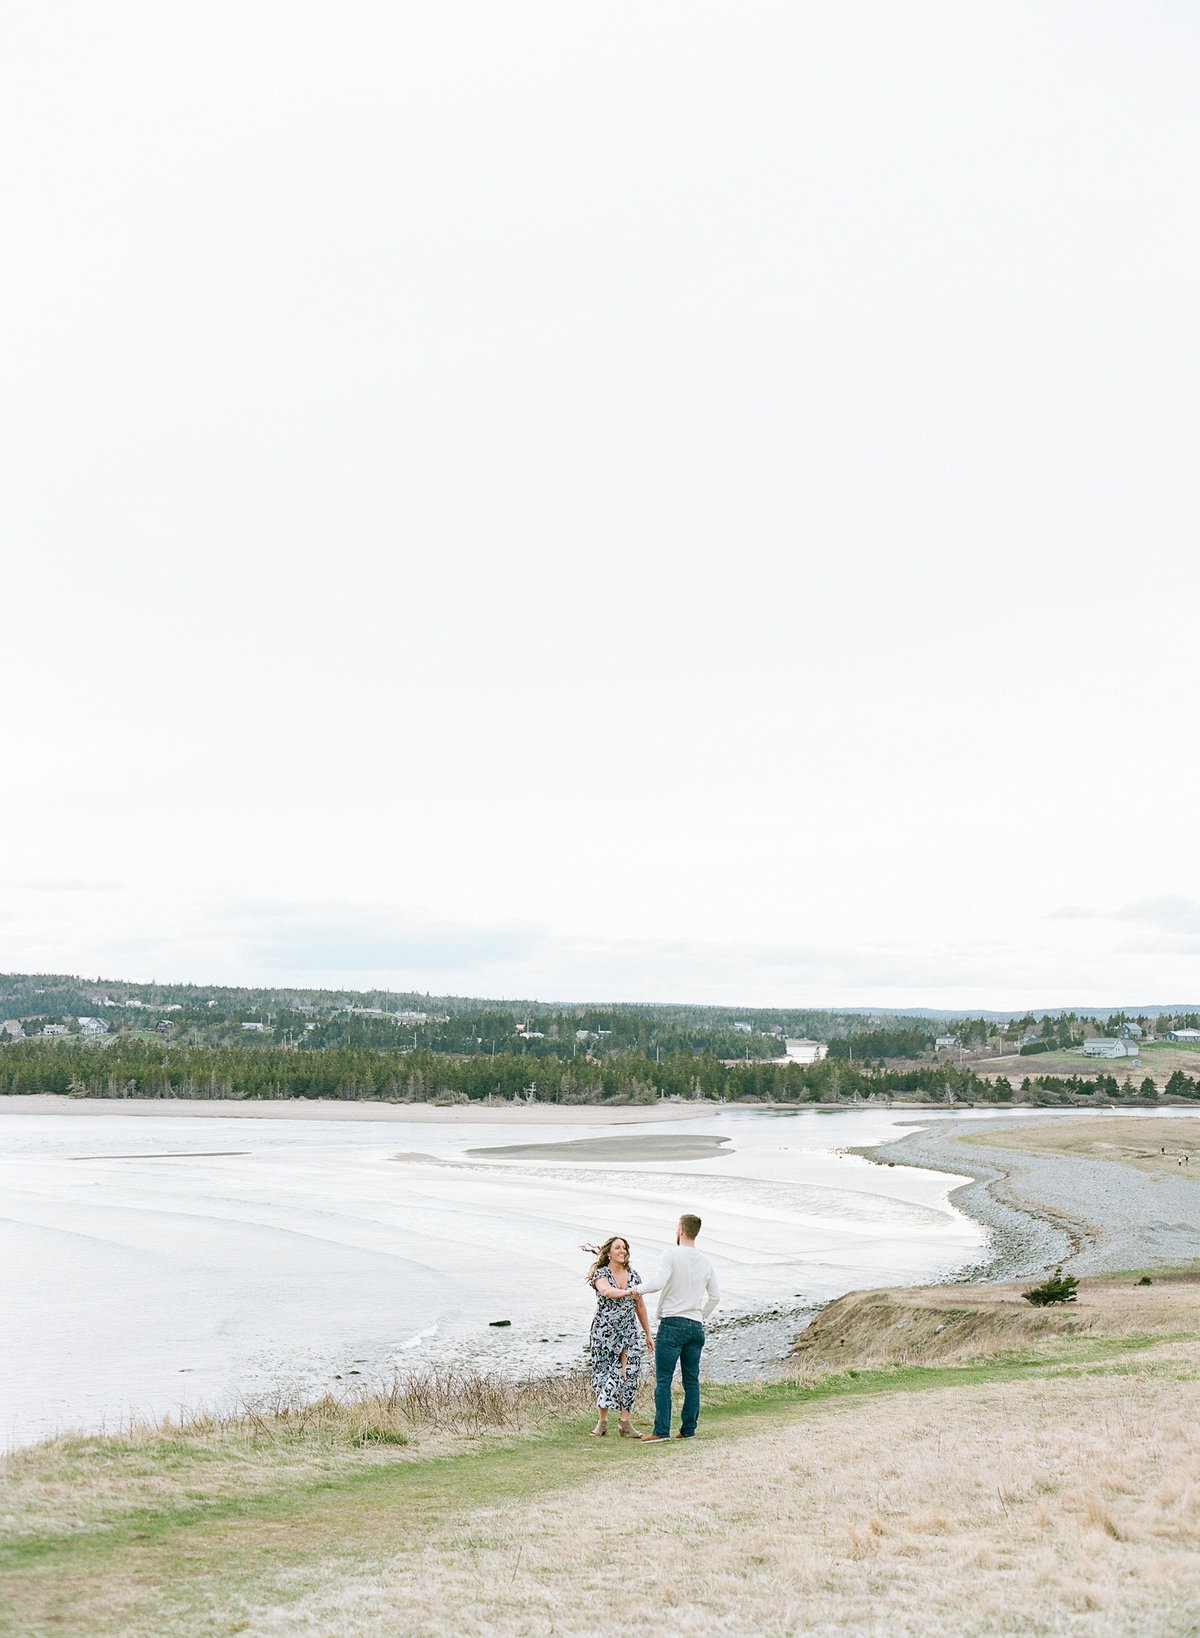 Jacqueline Anne Photography - Akayla and Andrew - Lawrencetown Beach-73